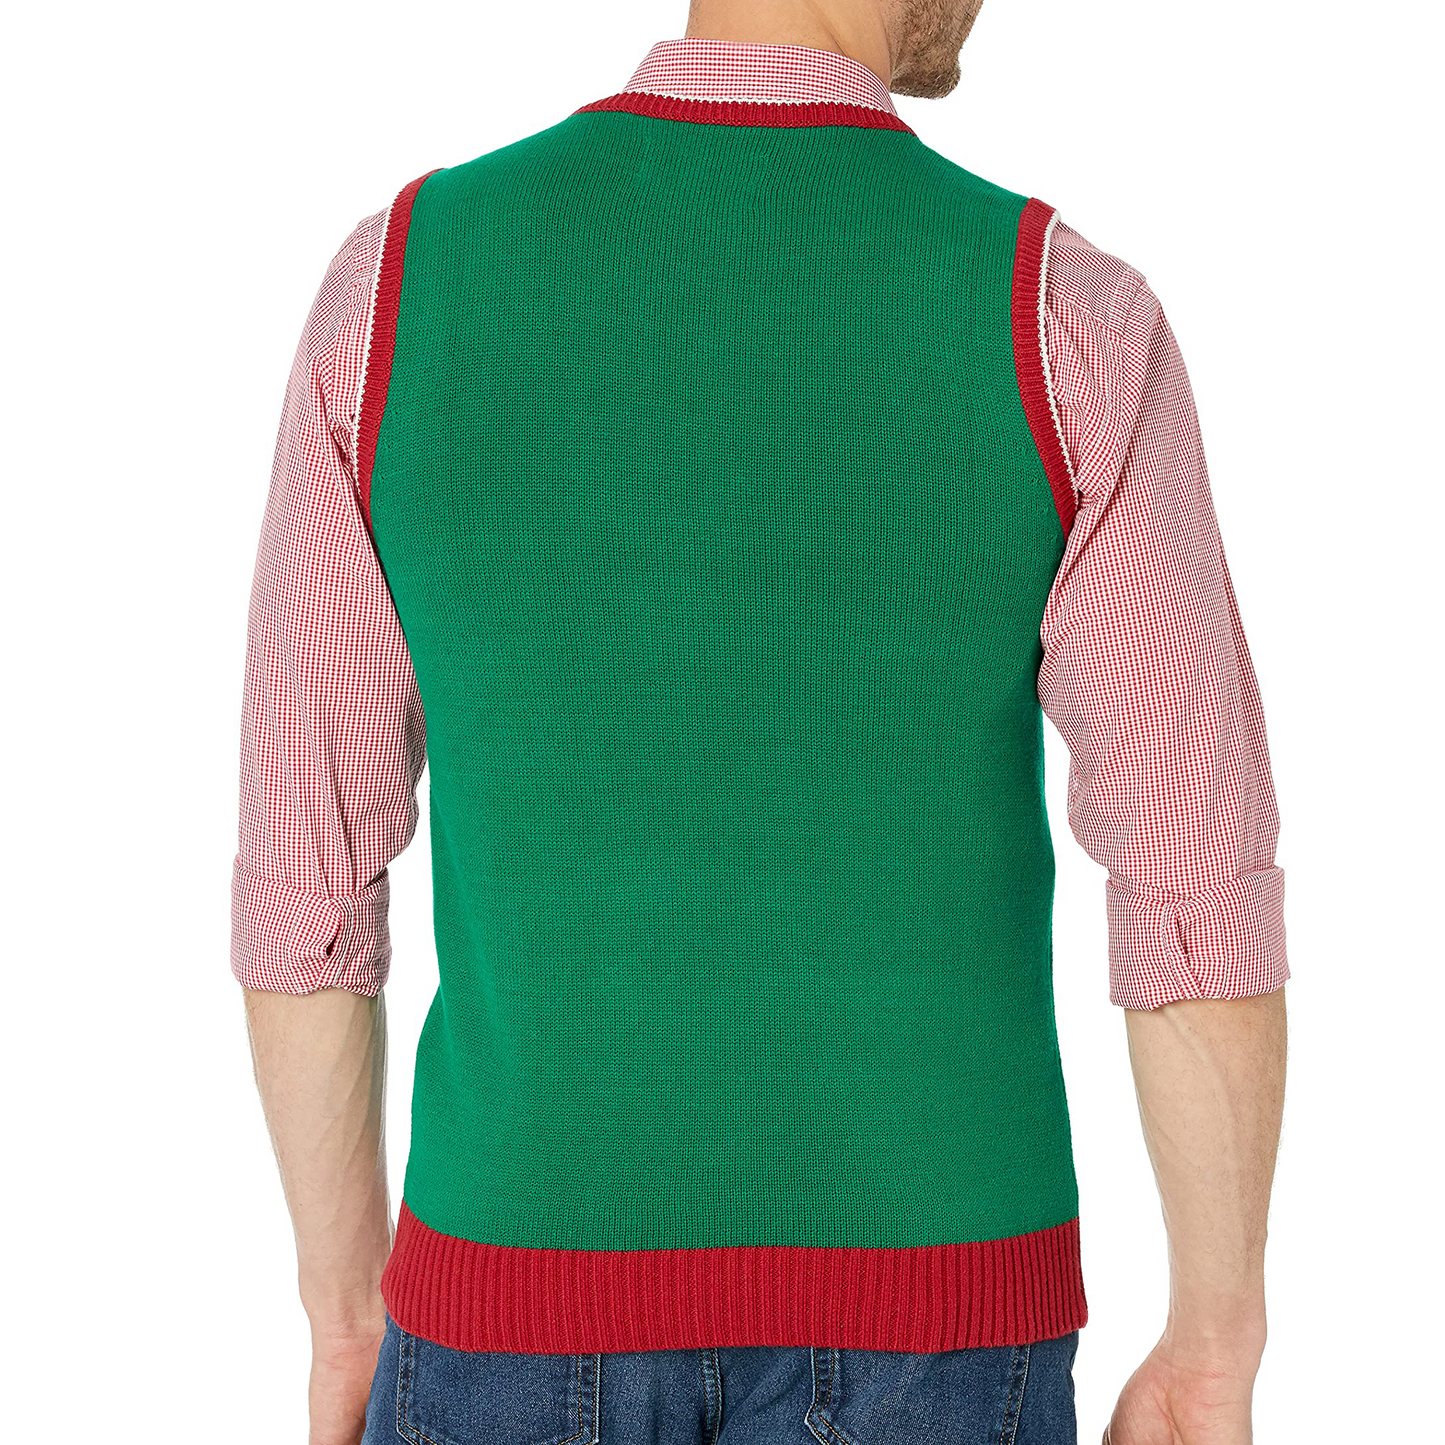 Gingerbread Man Ugly Christmas Sweater Vest